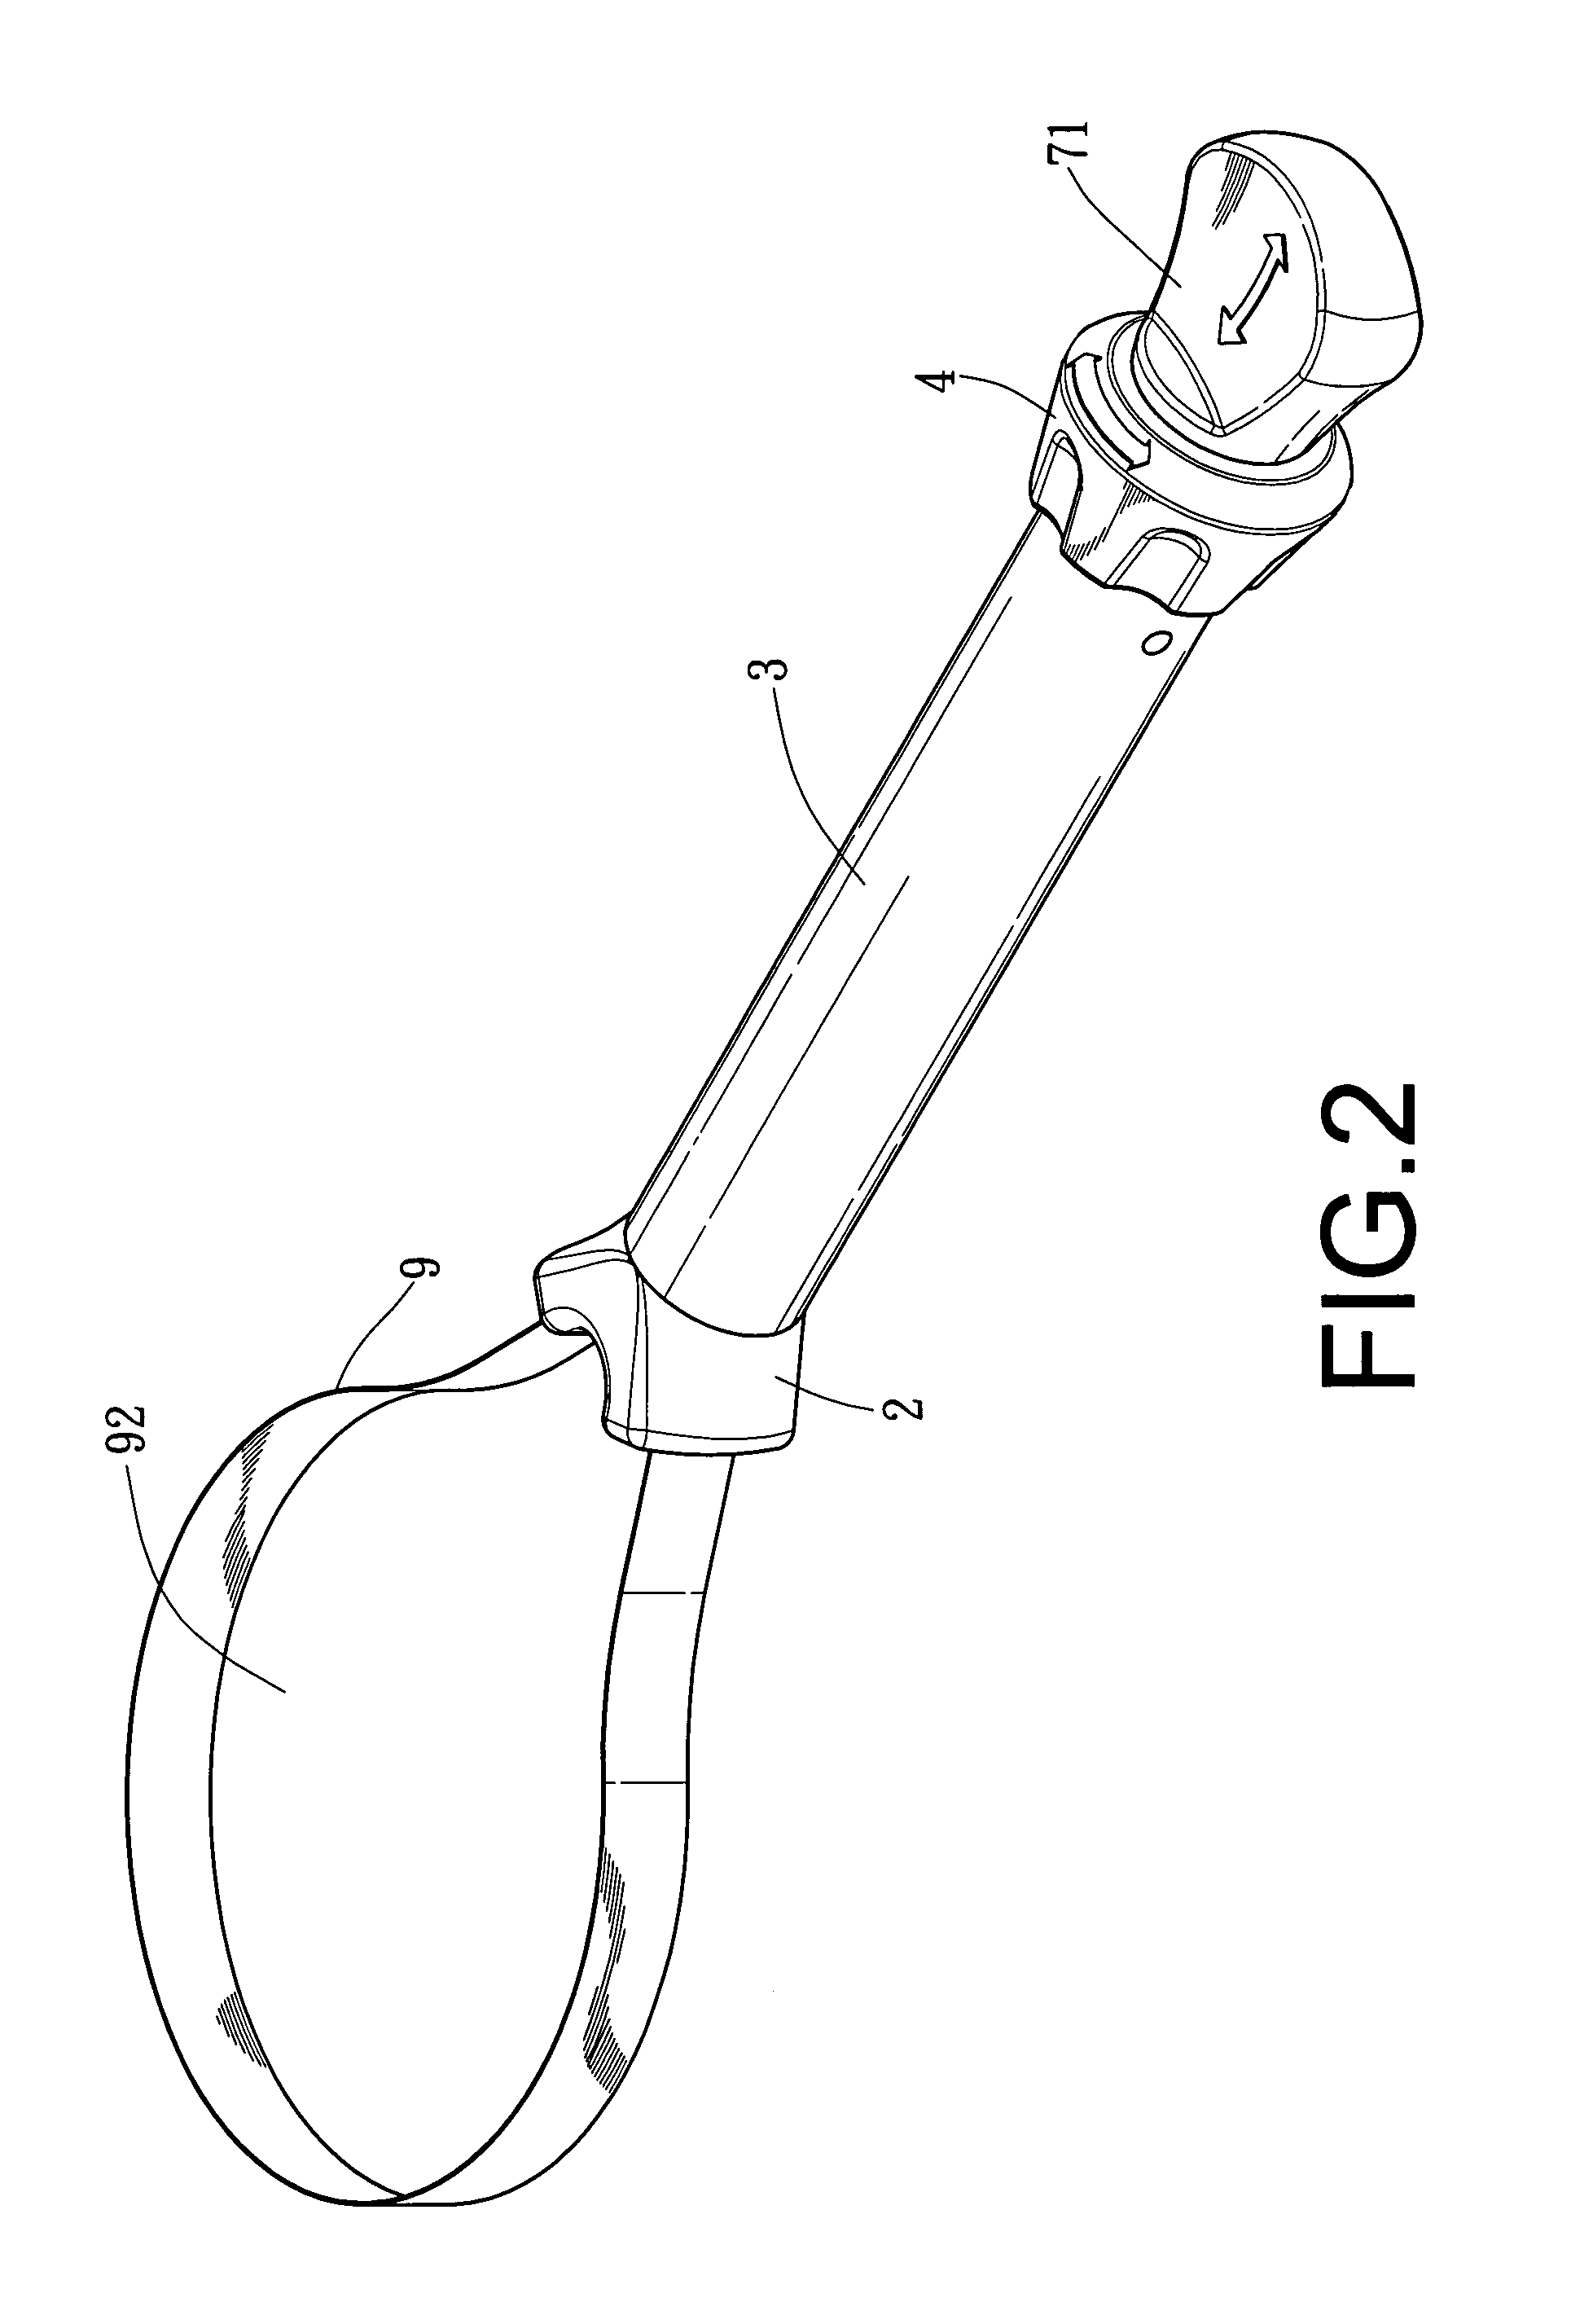 Fruit and vegetable seed removing device